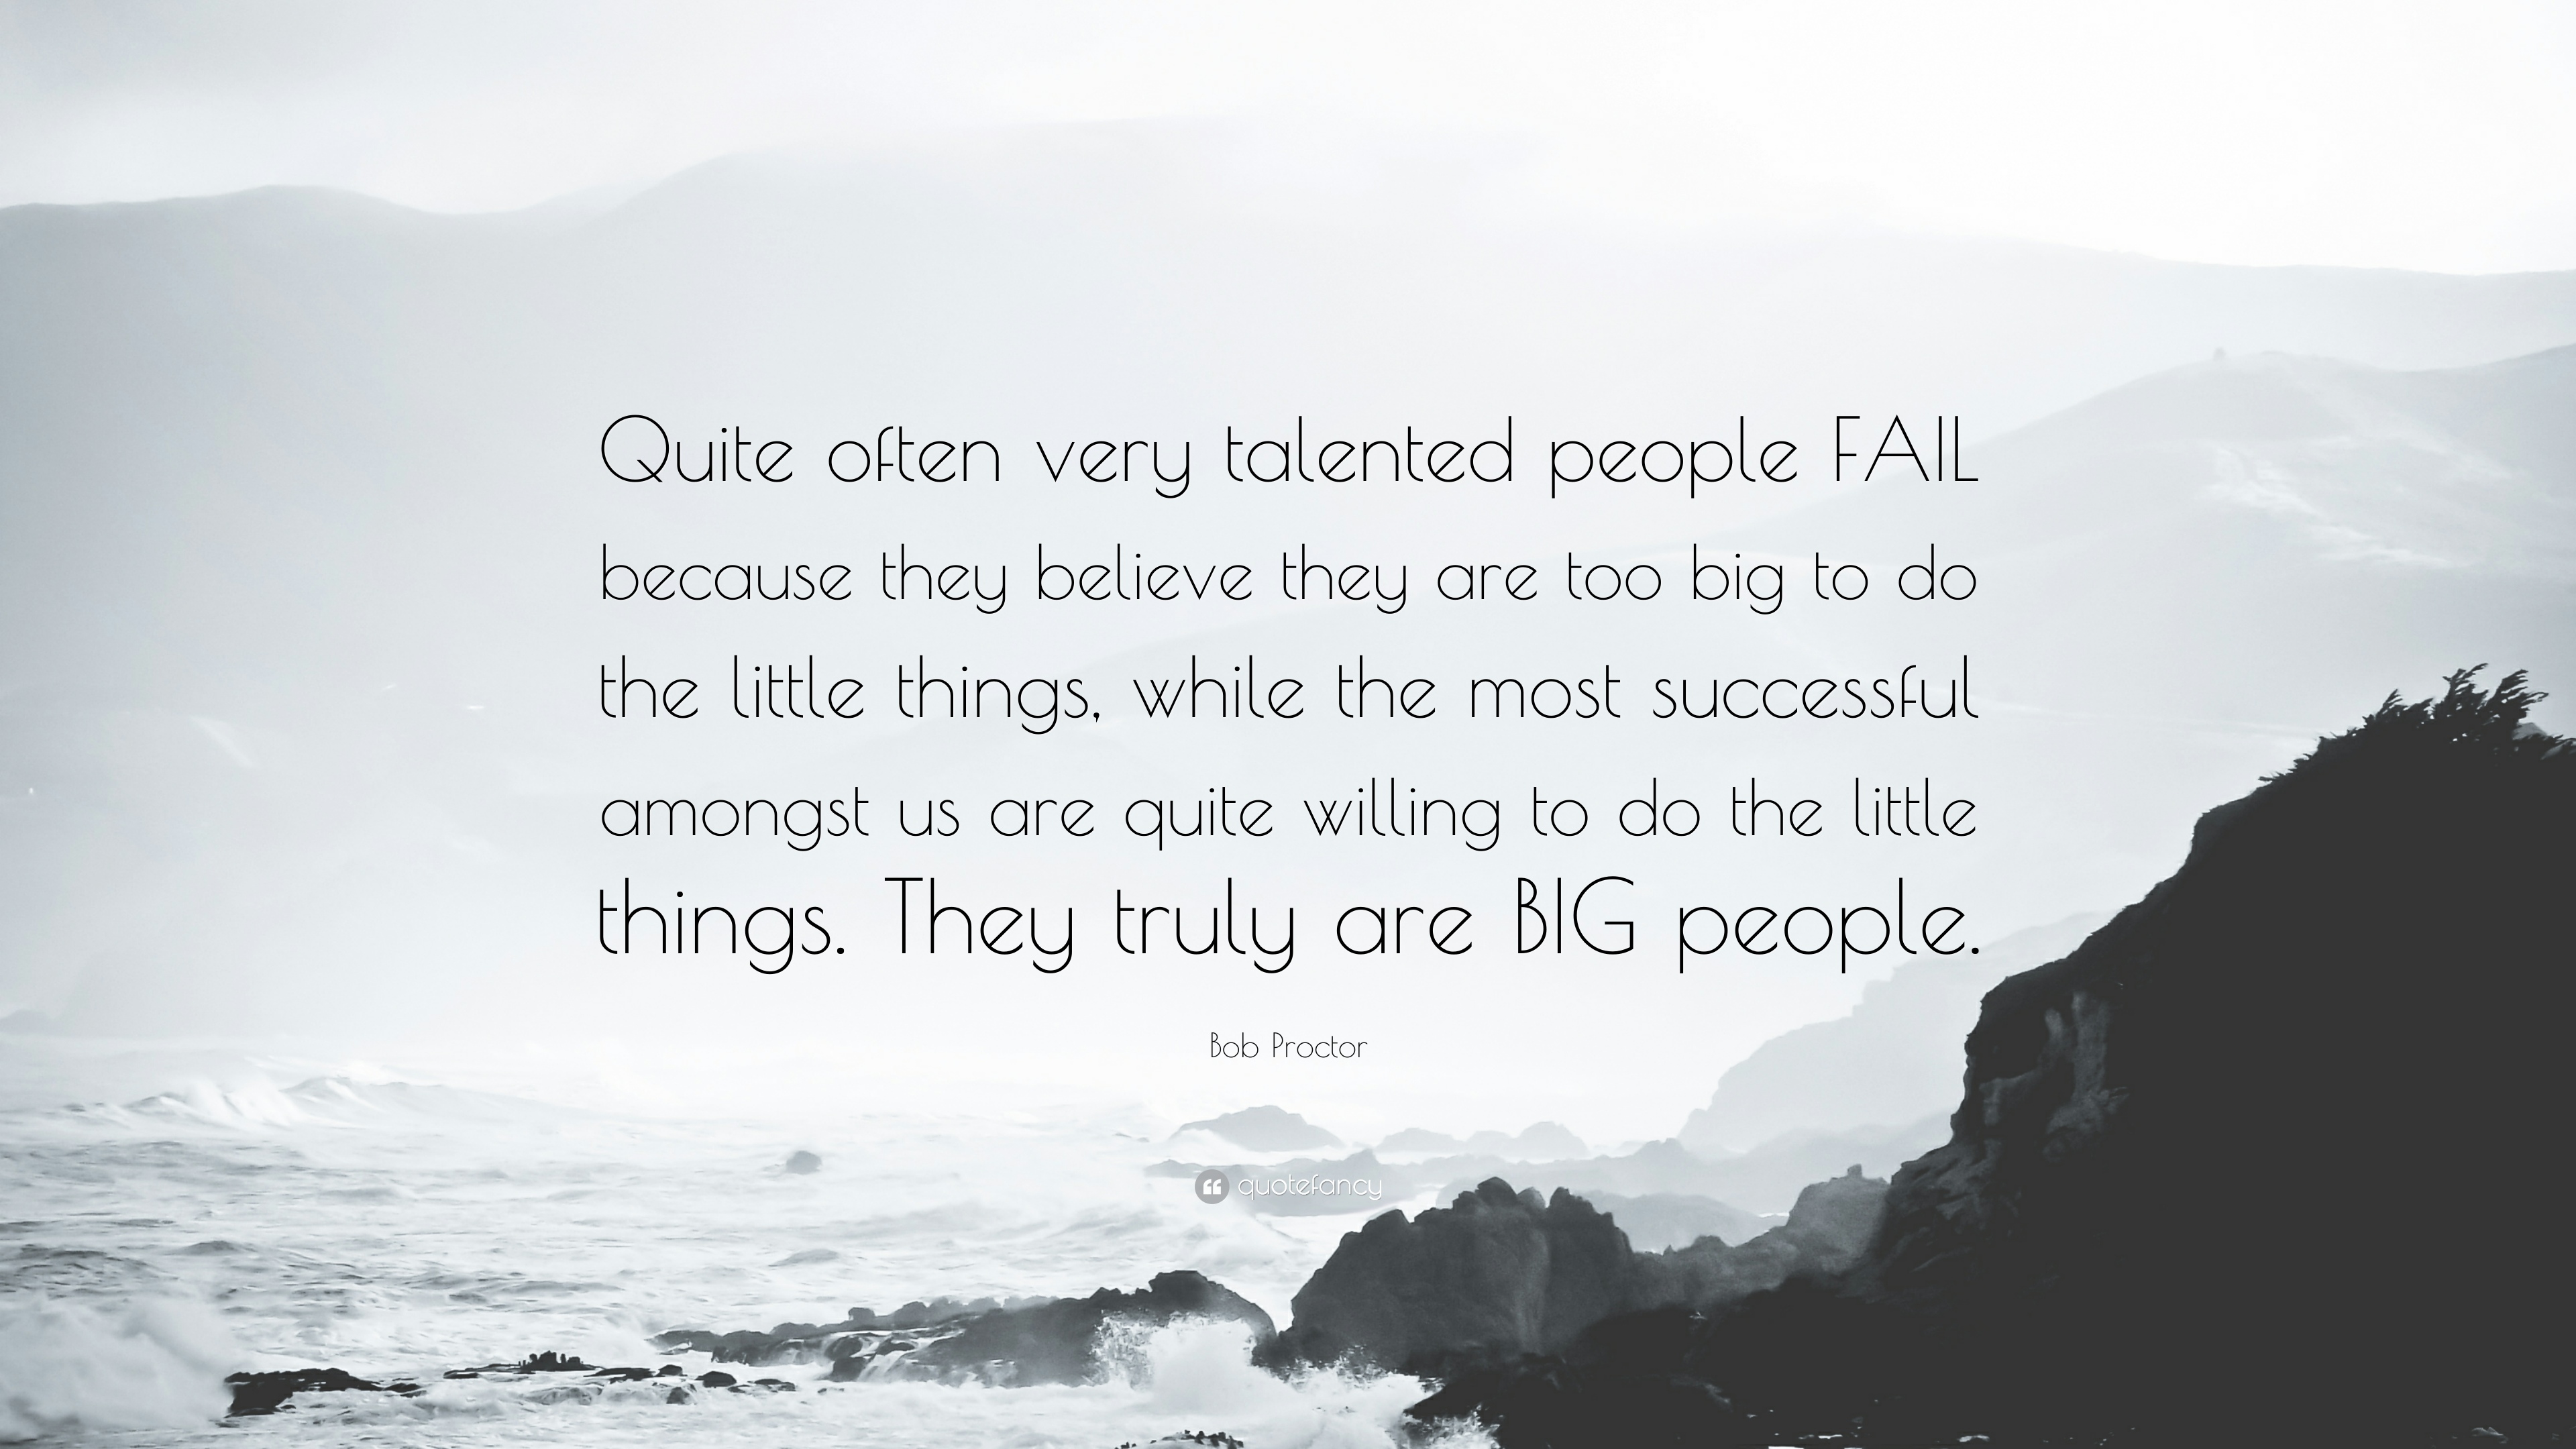 Bob Proctor Quote: “Quite often very talented people FAIL because they believe they are too big to do the little things, while the most succ.”